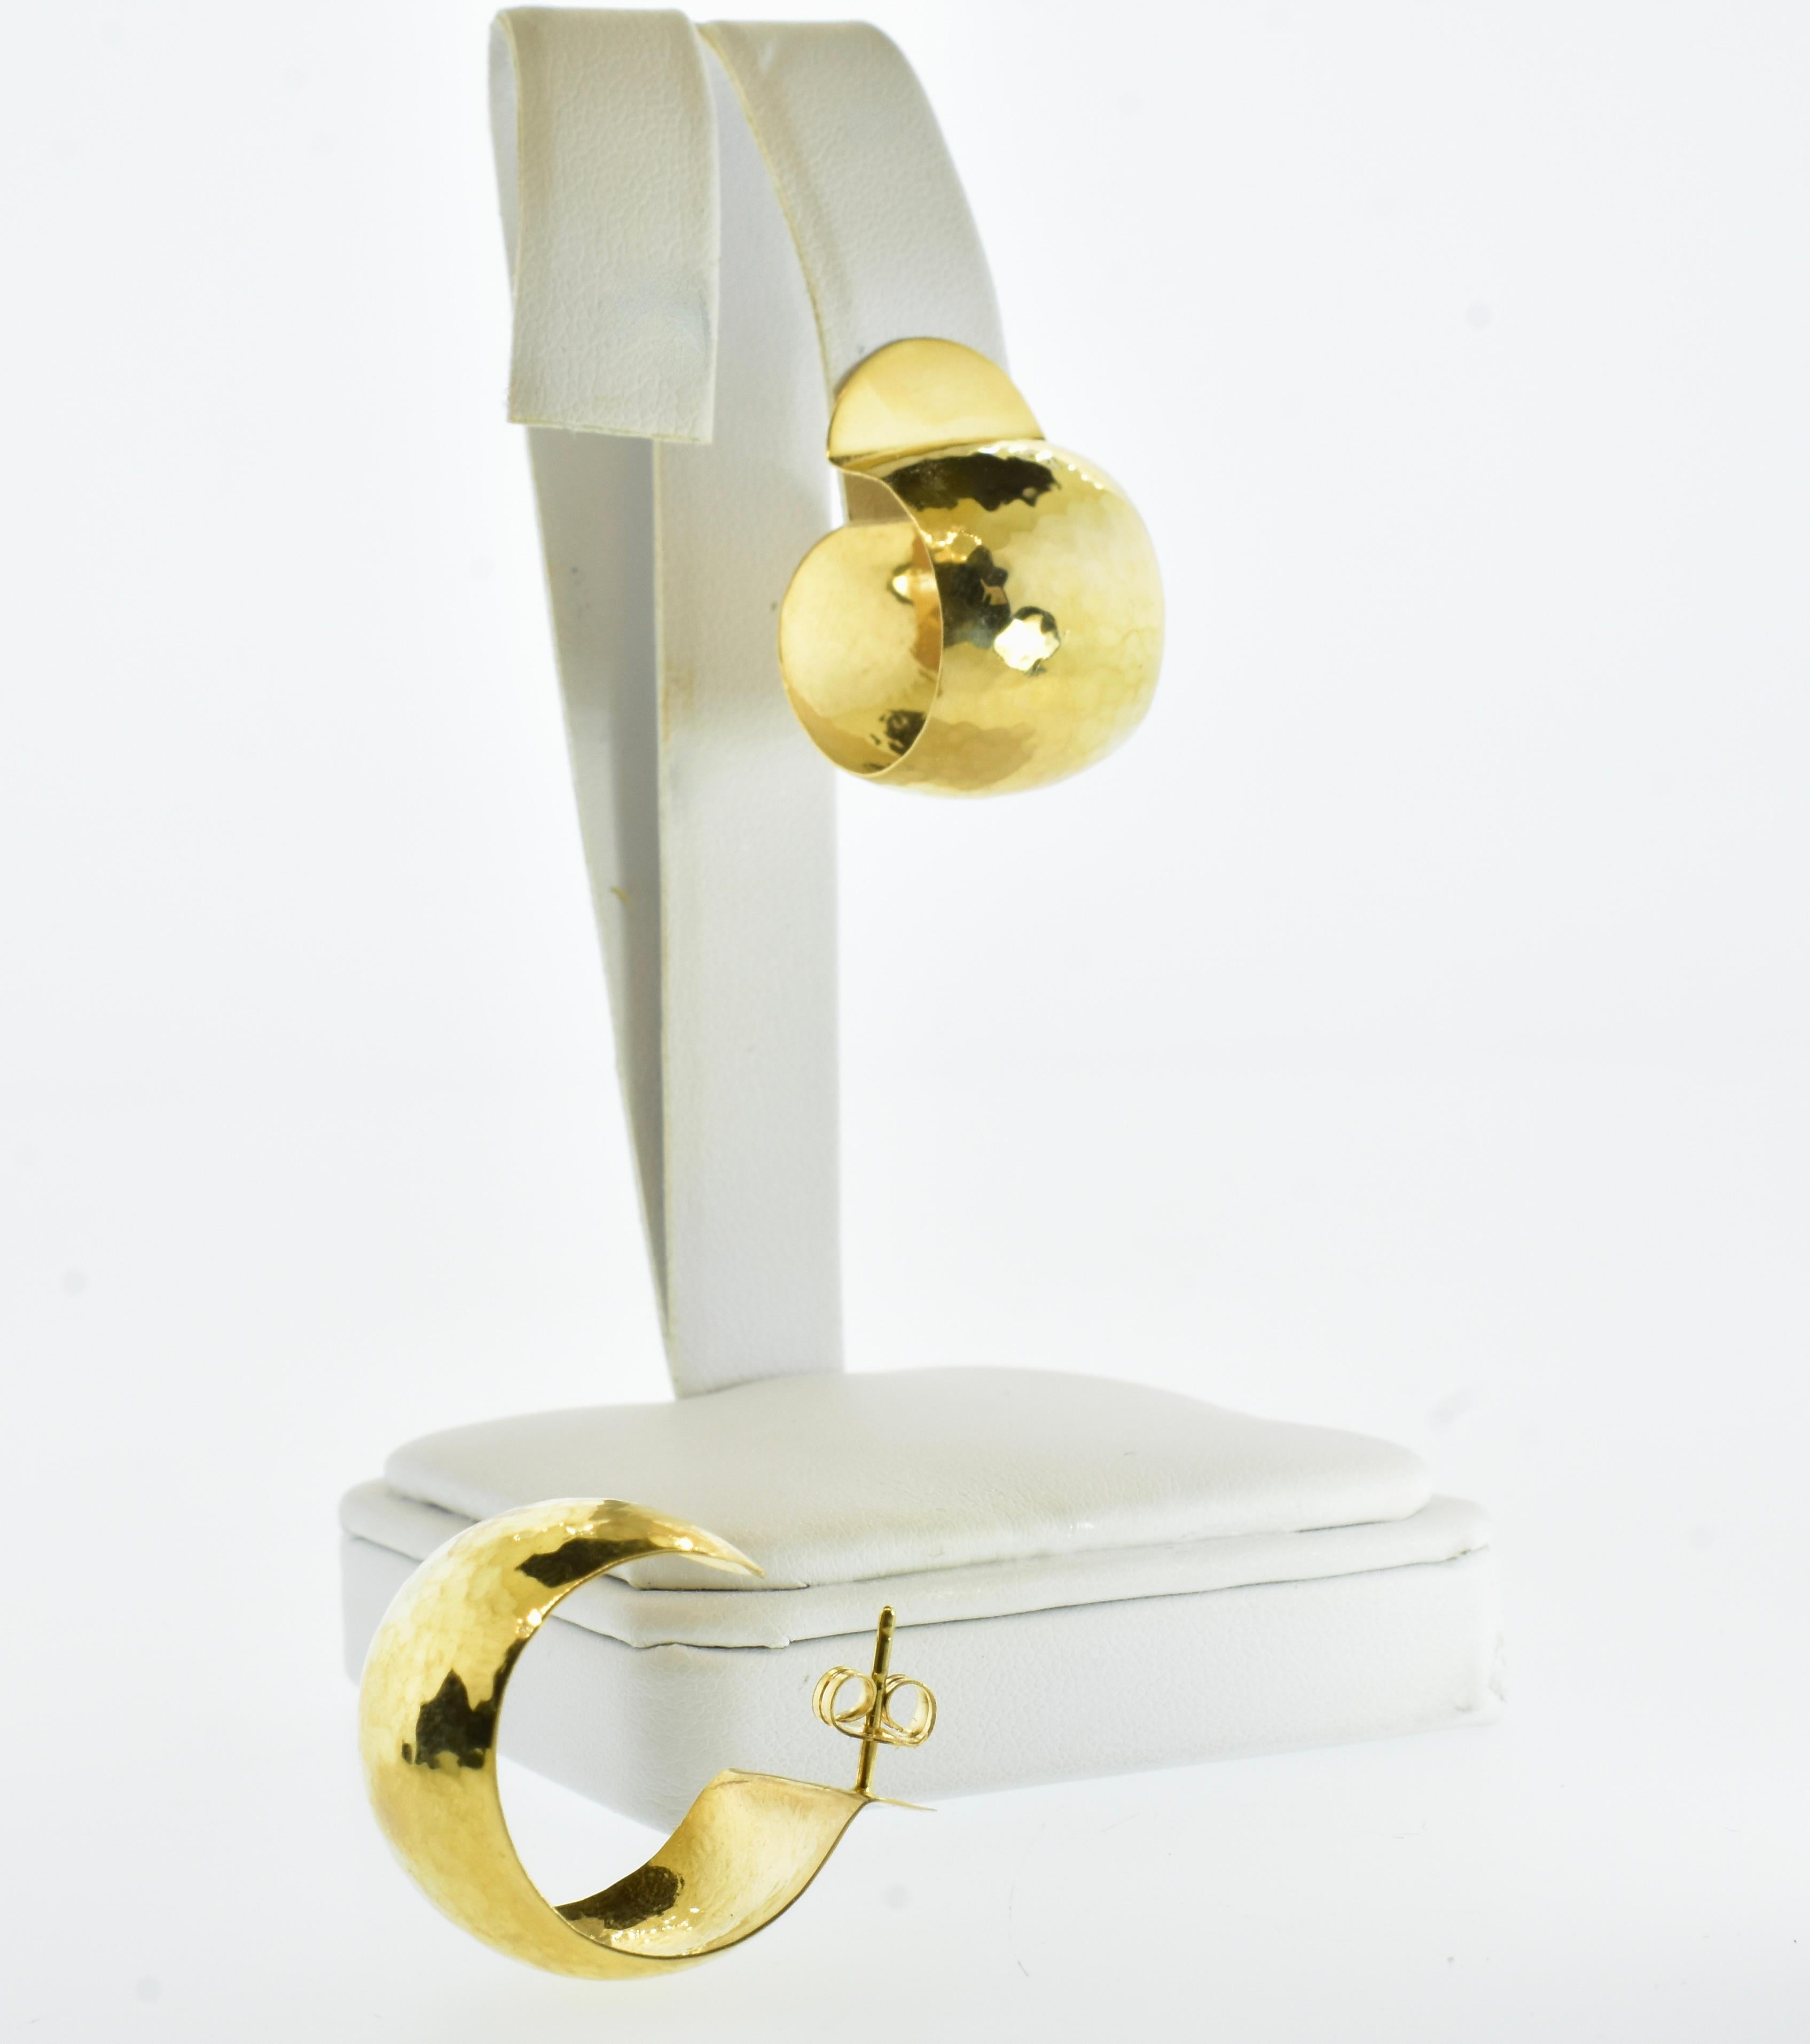 Hoop Style Earrings in Bright Yellow Gold, Hammered Finish Contemporary, c. 2000 1